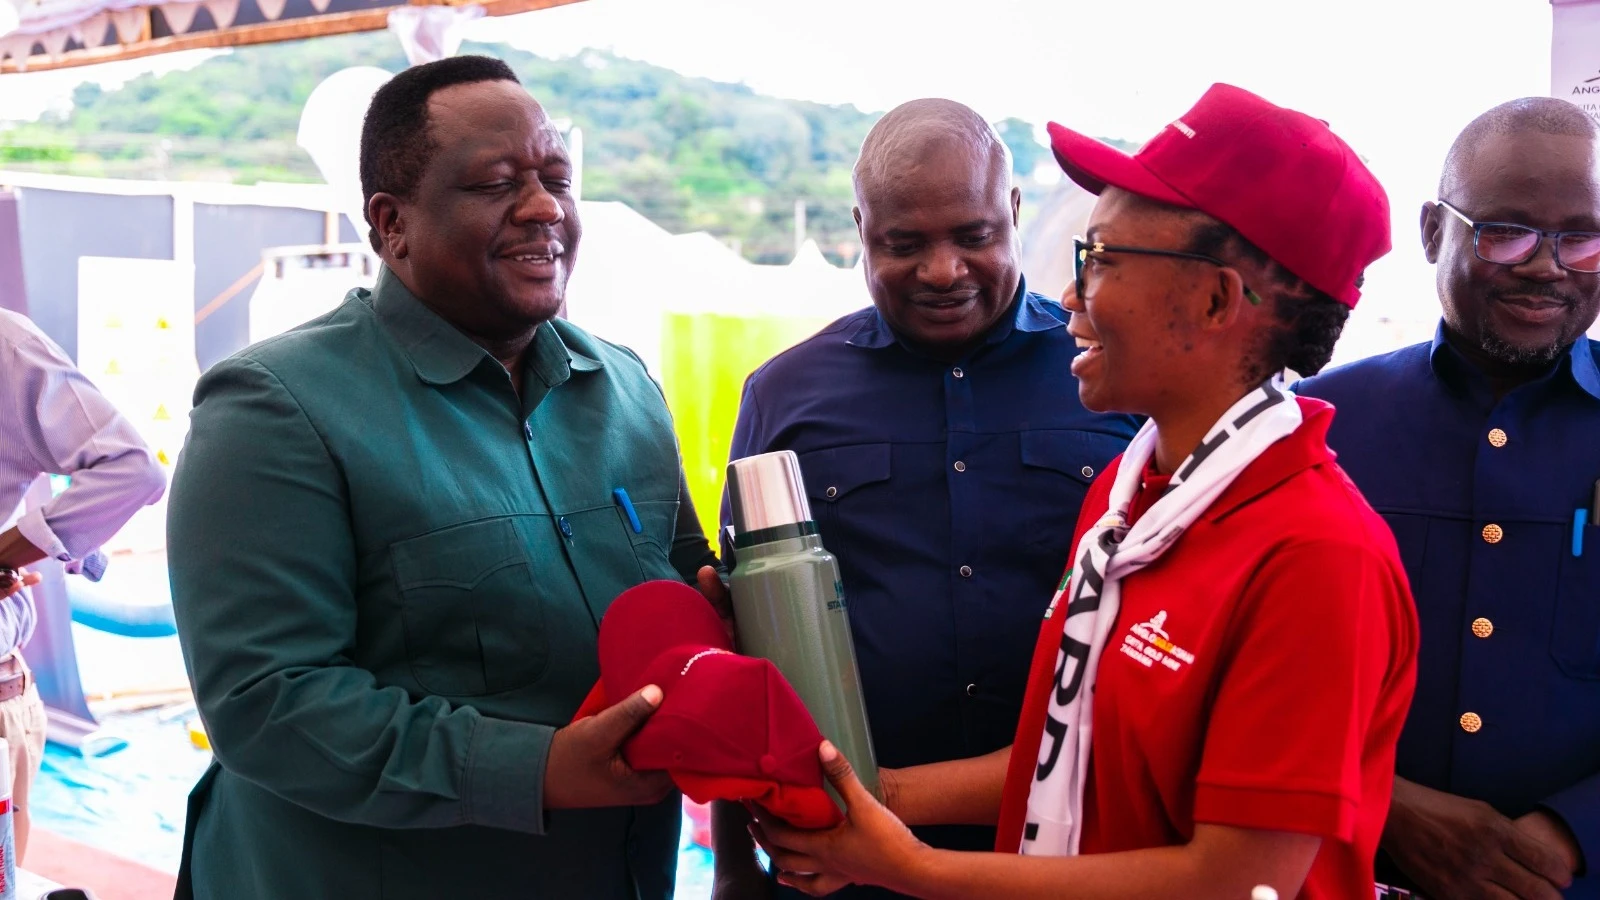 The President of the Tanzania Confederation of Trade Unions (TUCTA), Tumaini Nyamhoka, receives a gift from GGML’s Senior Officer - Social and Economic Development, Ruth Mharagi, during a visit to the GGML stand at the OSHA exhibition in Arusha.